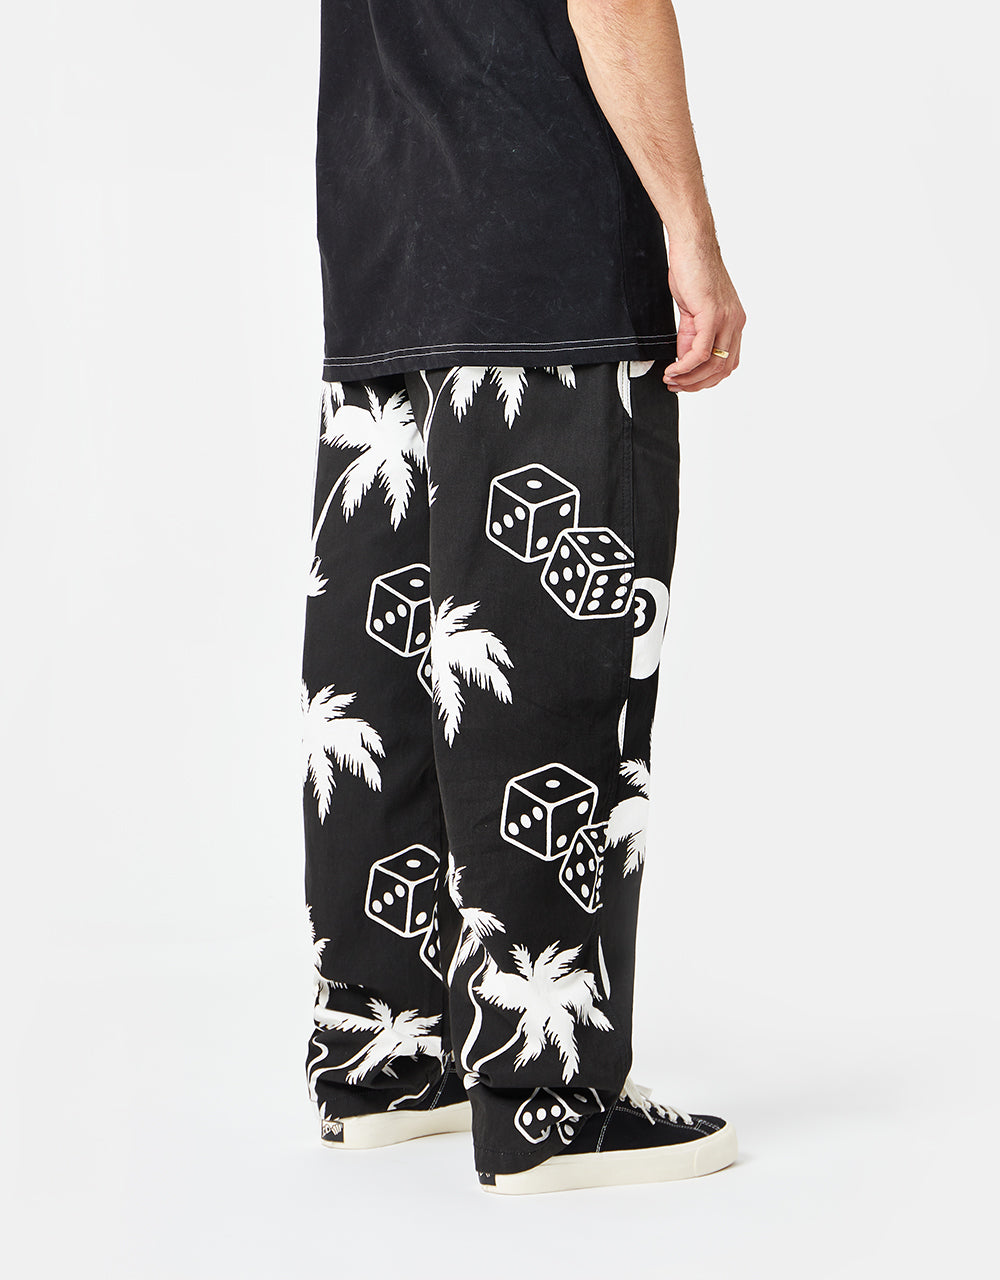 Route One Organic Baggy Pants - Palms Black/White